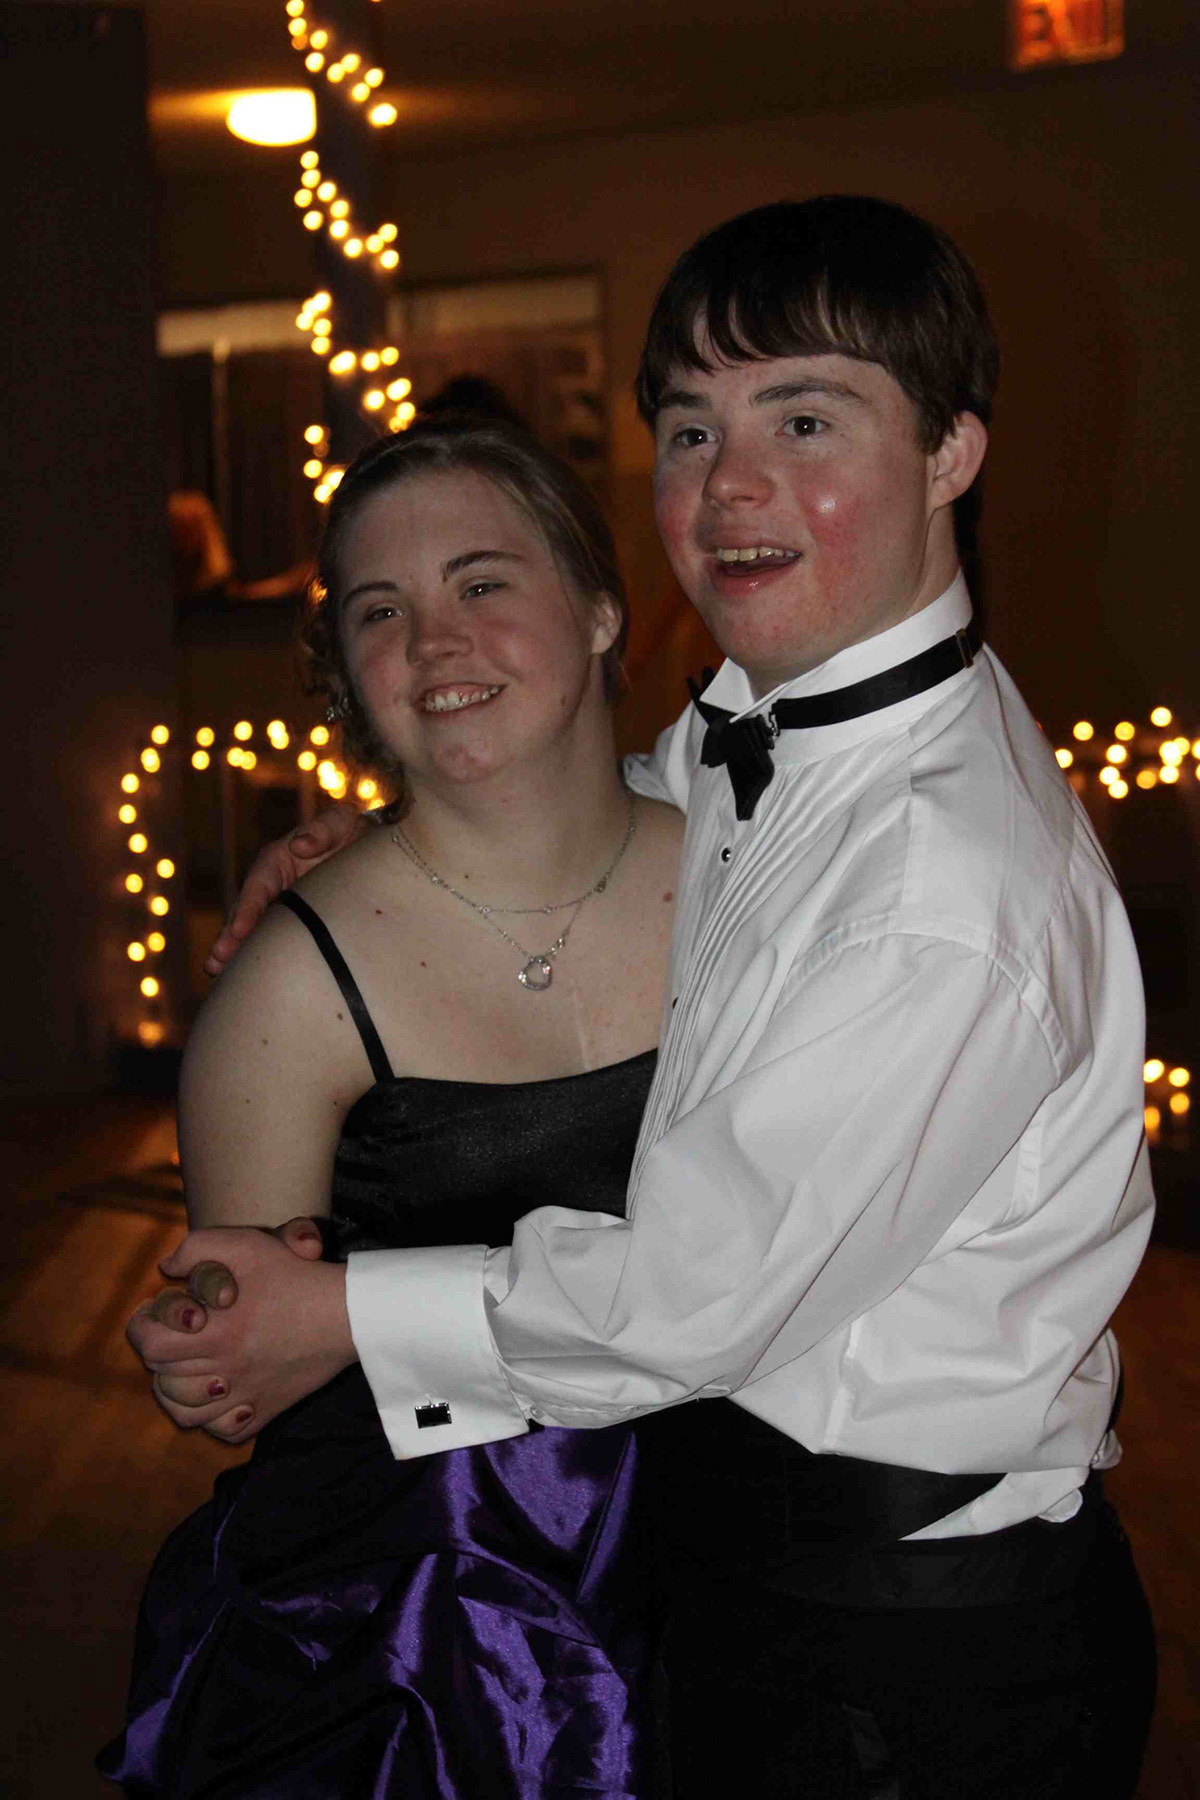 prom dancing High School disabilities down syndrome equal opportunities inclusion dates high school proms spring dance Trisomy 21